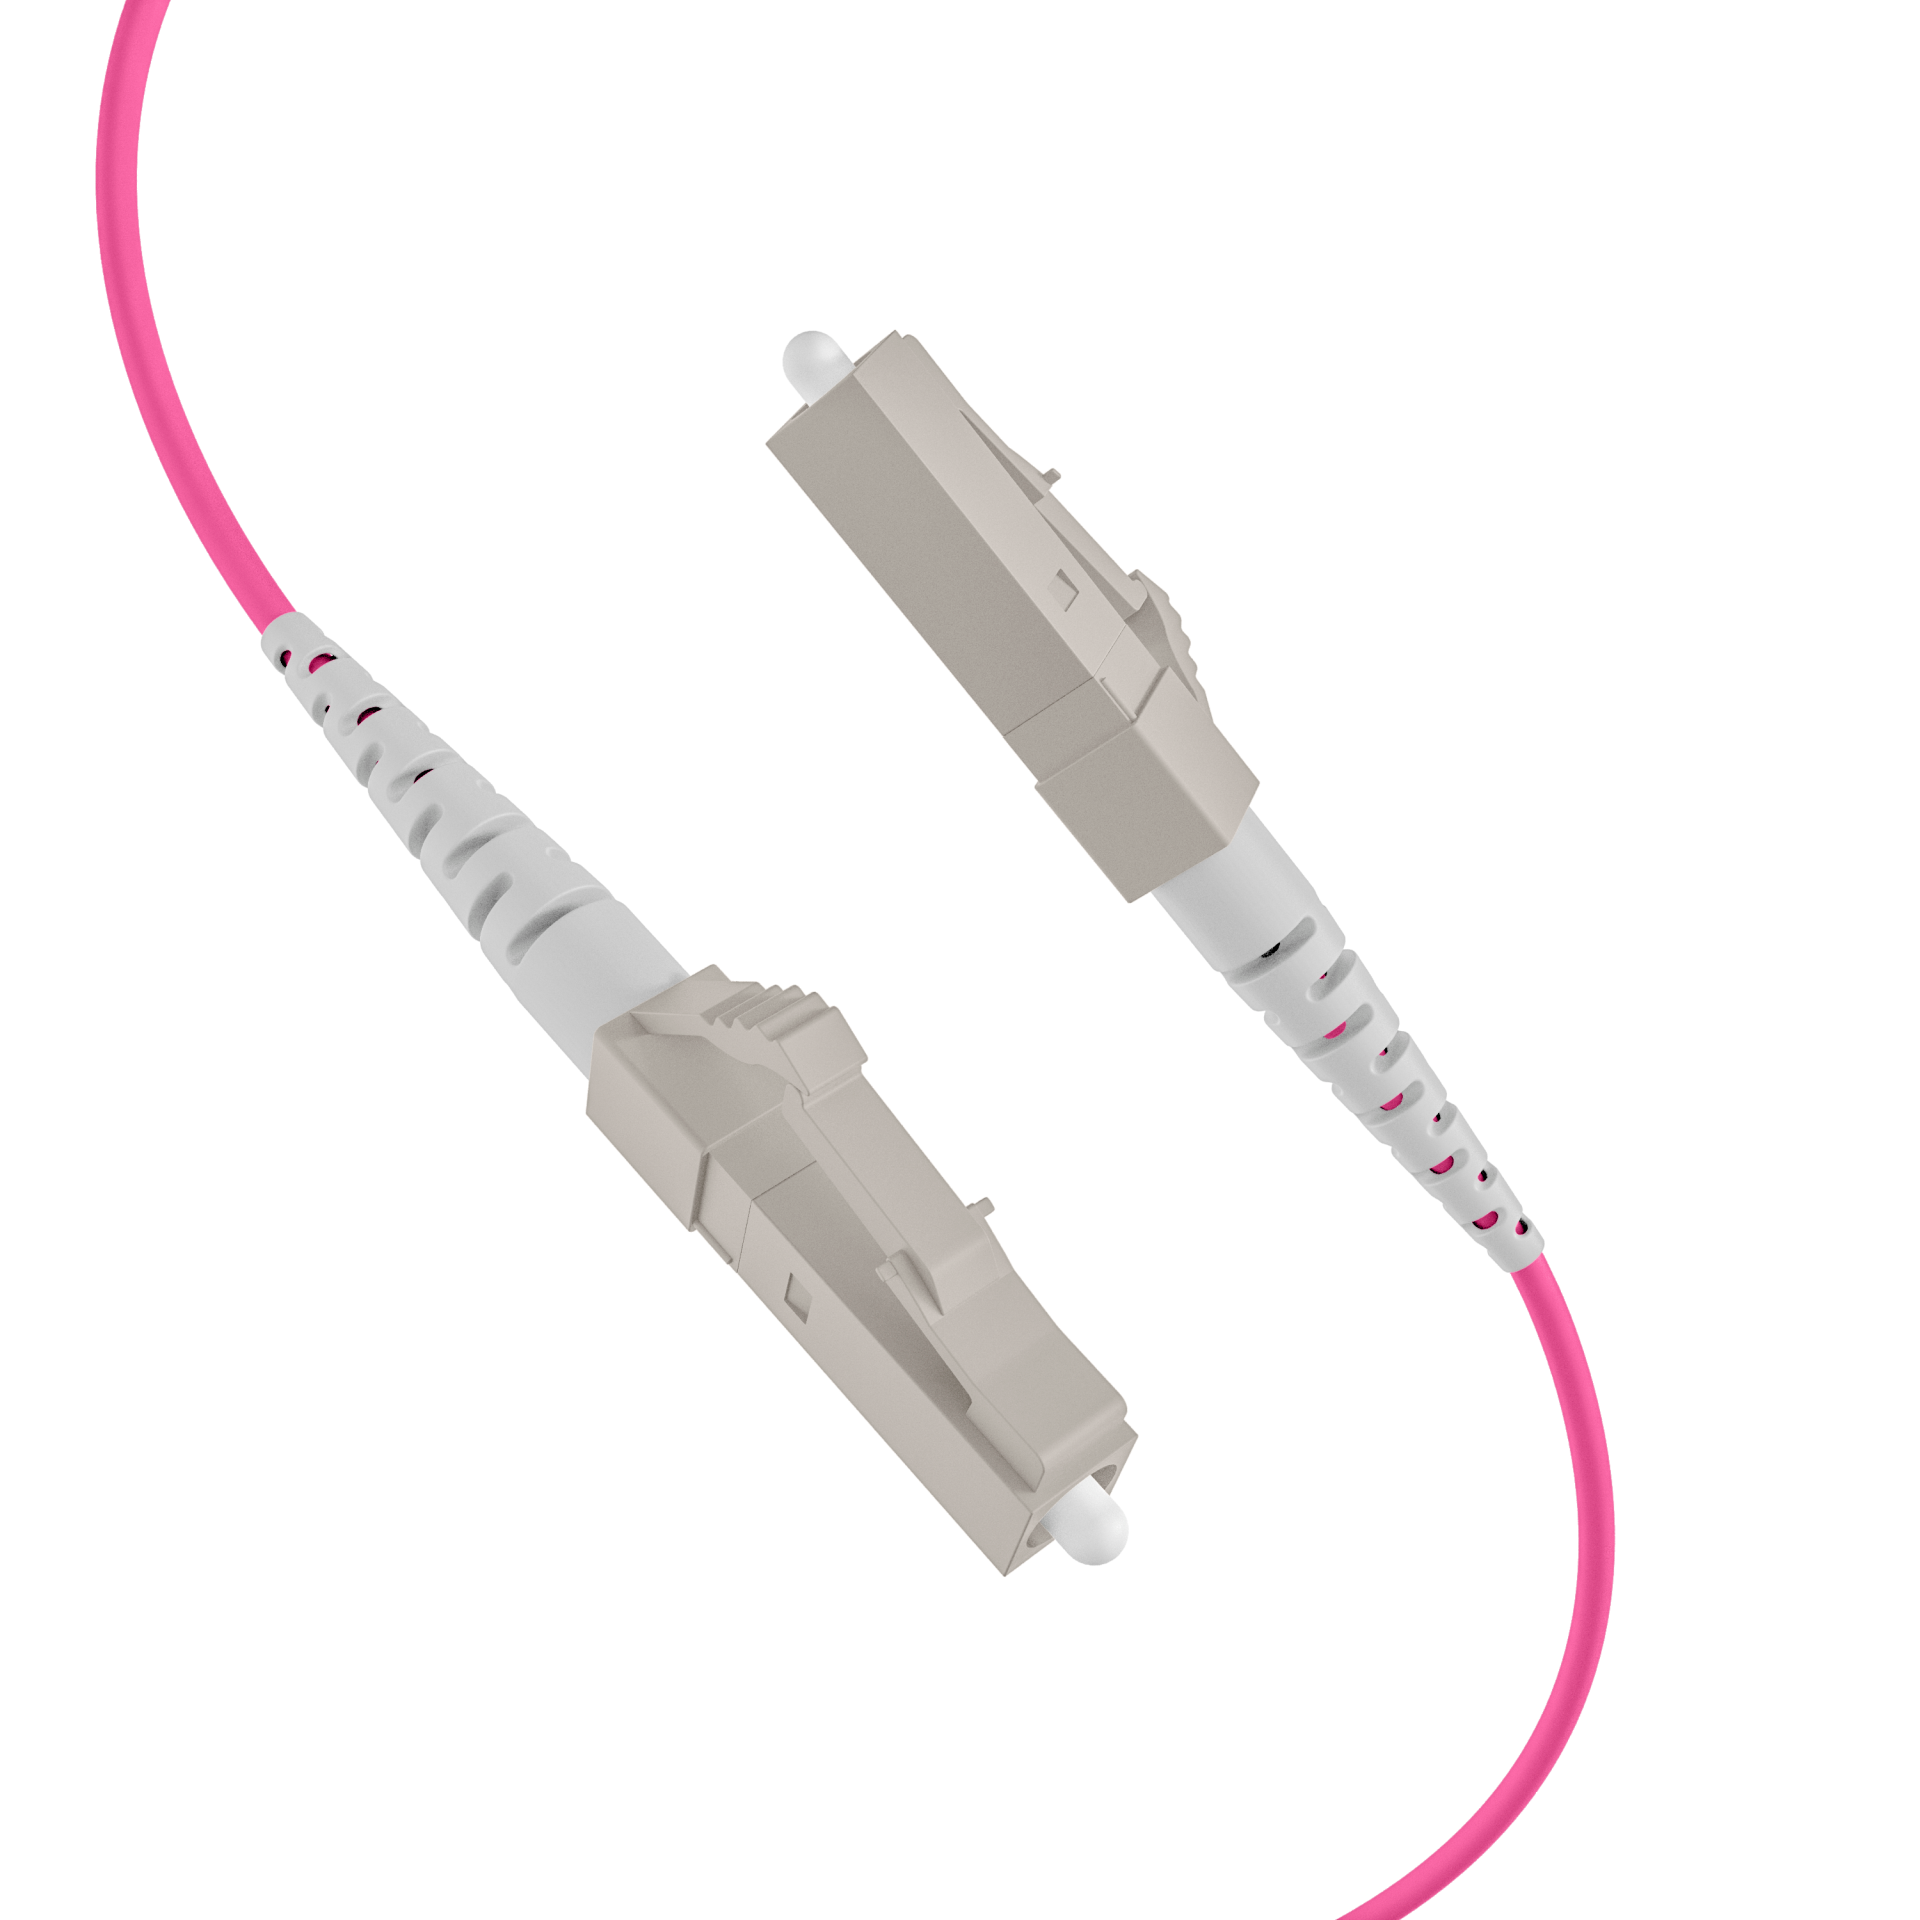 Trunkcable U-DQ(ZN)BH OM4 12G (1x12) LC-LC,150m Dca LSZH